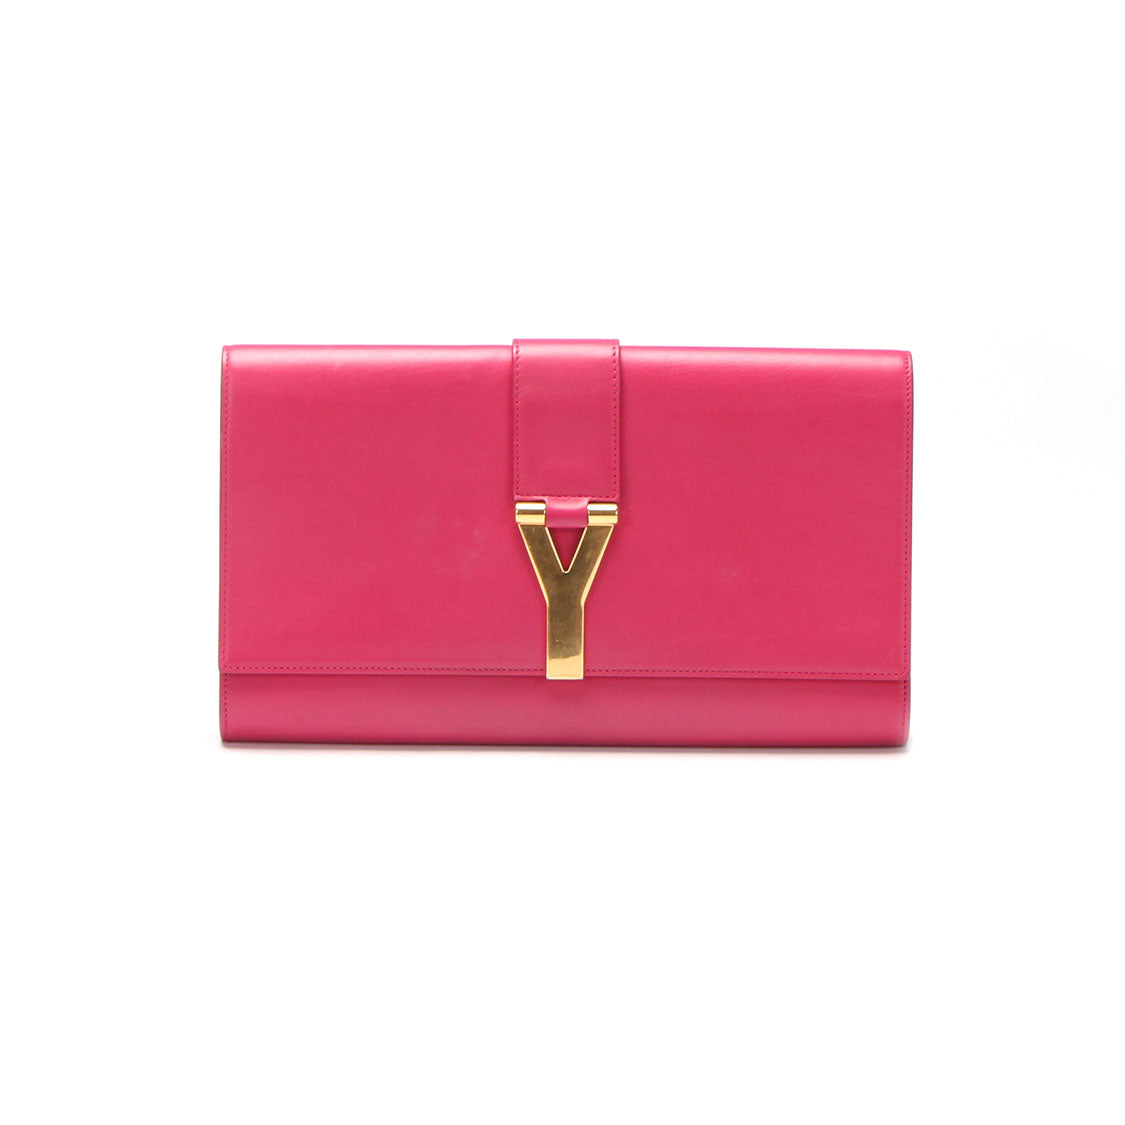 Yves Saint Laurent Ligne Y Leather Clutch Bag Leather Clutch Bag 311213 in Good condition